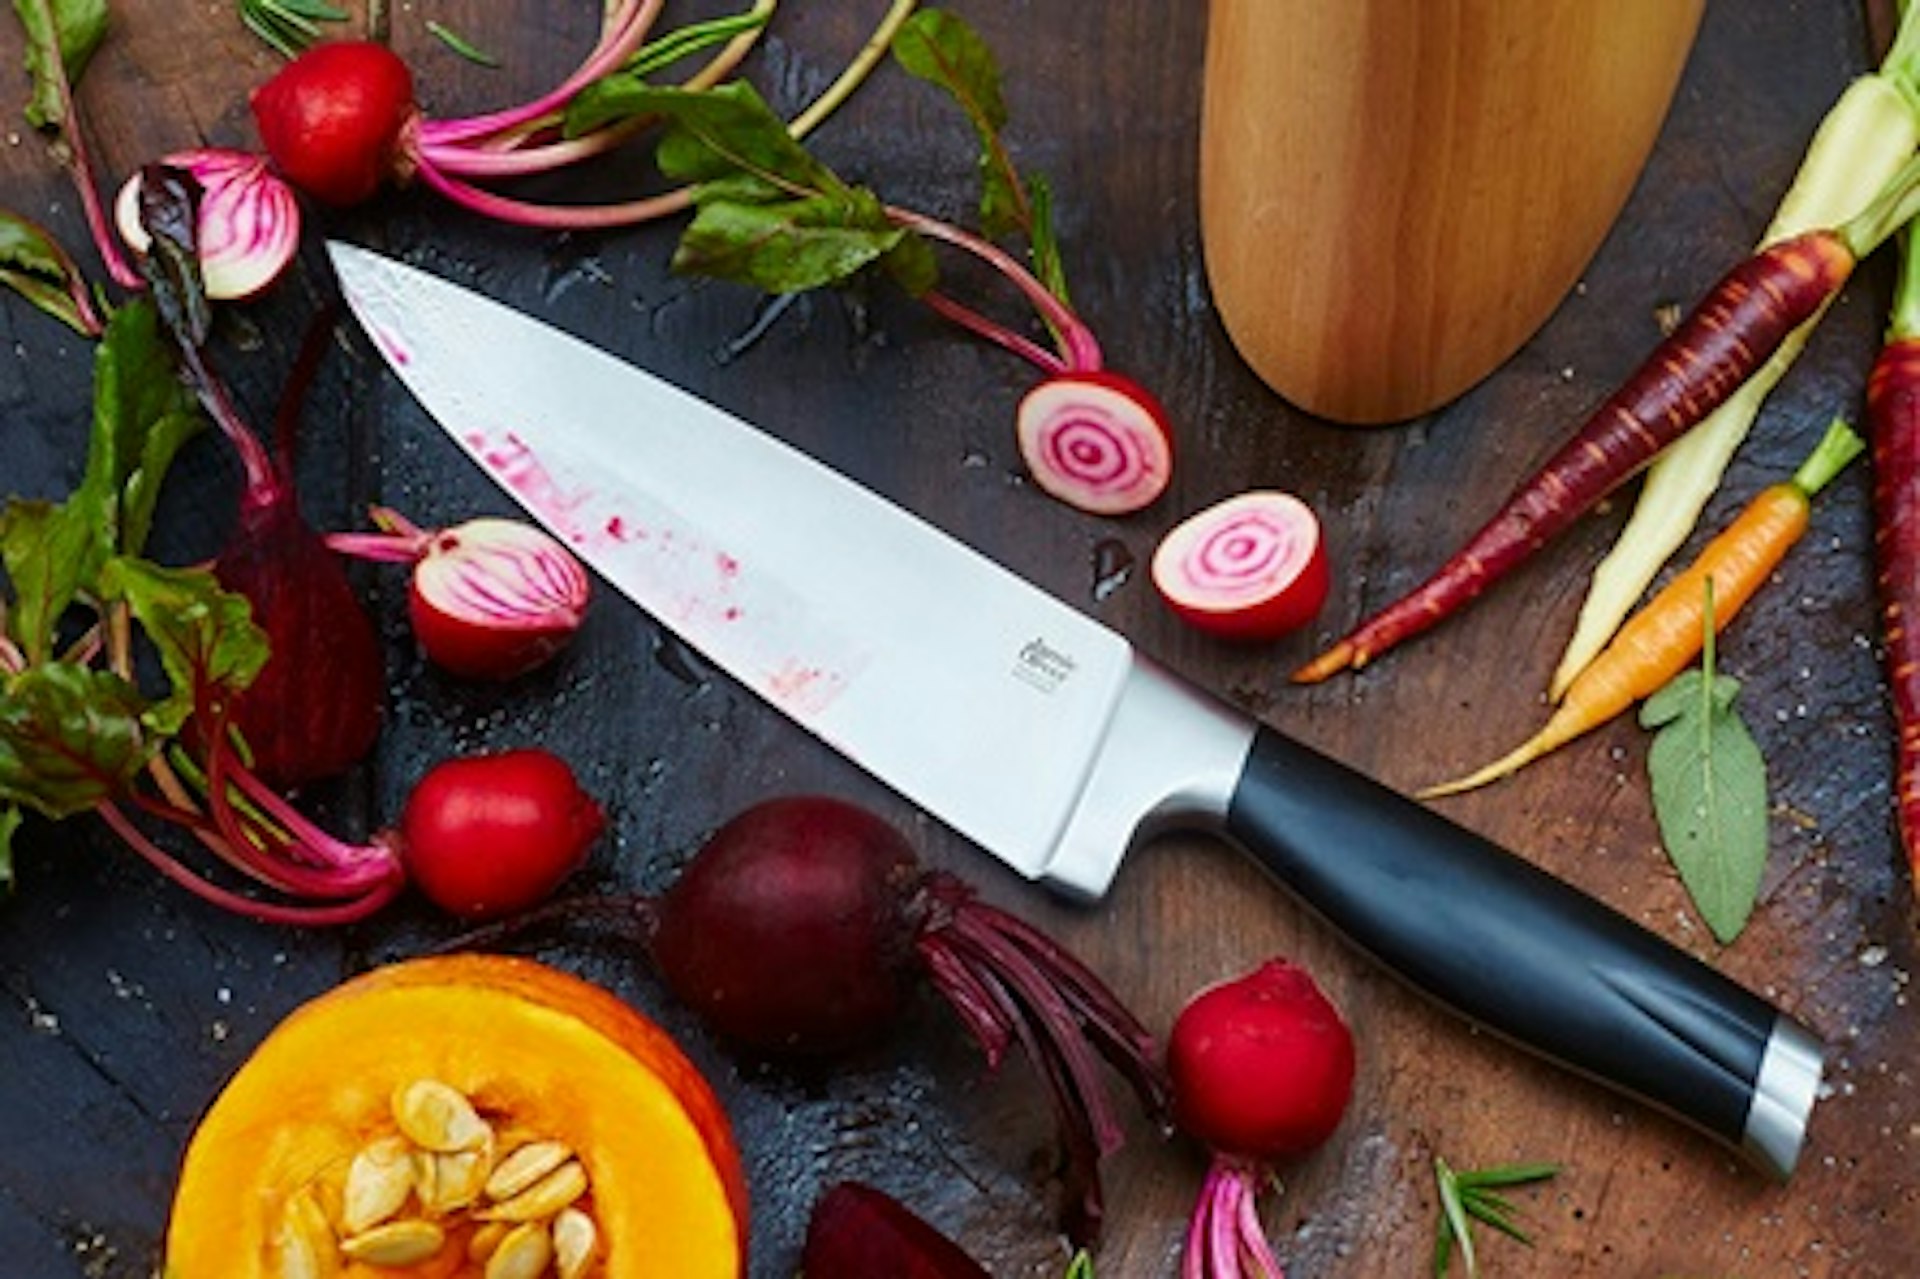 Sharpen Your Knife Skills: The Essentials Class at The Jamie Oliver Cookery School 1